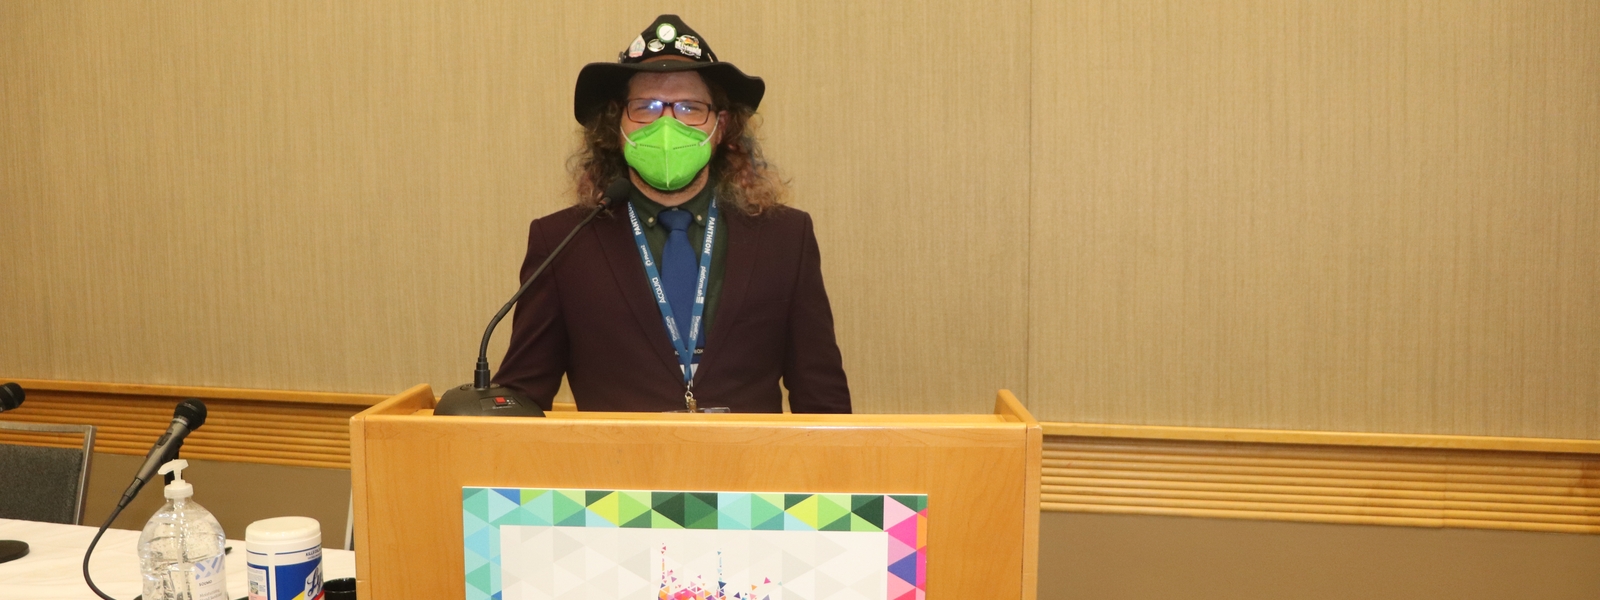 Nick speaking at DrupalCon North America Portland 2022 -  behind a lecturn with DrupalCon signage, wearing attendee badge over purple suit with a green mask and a black hat.